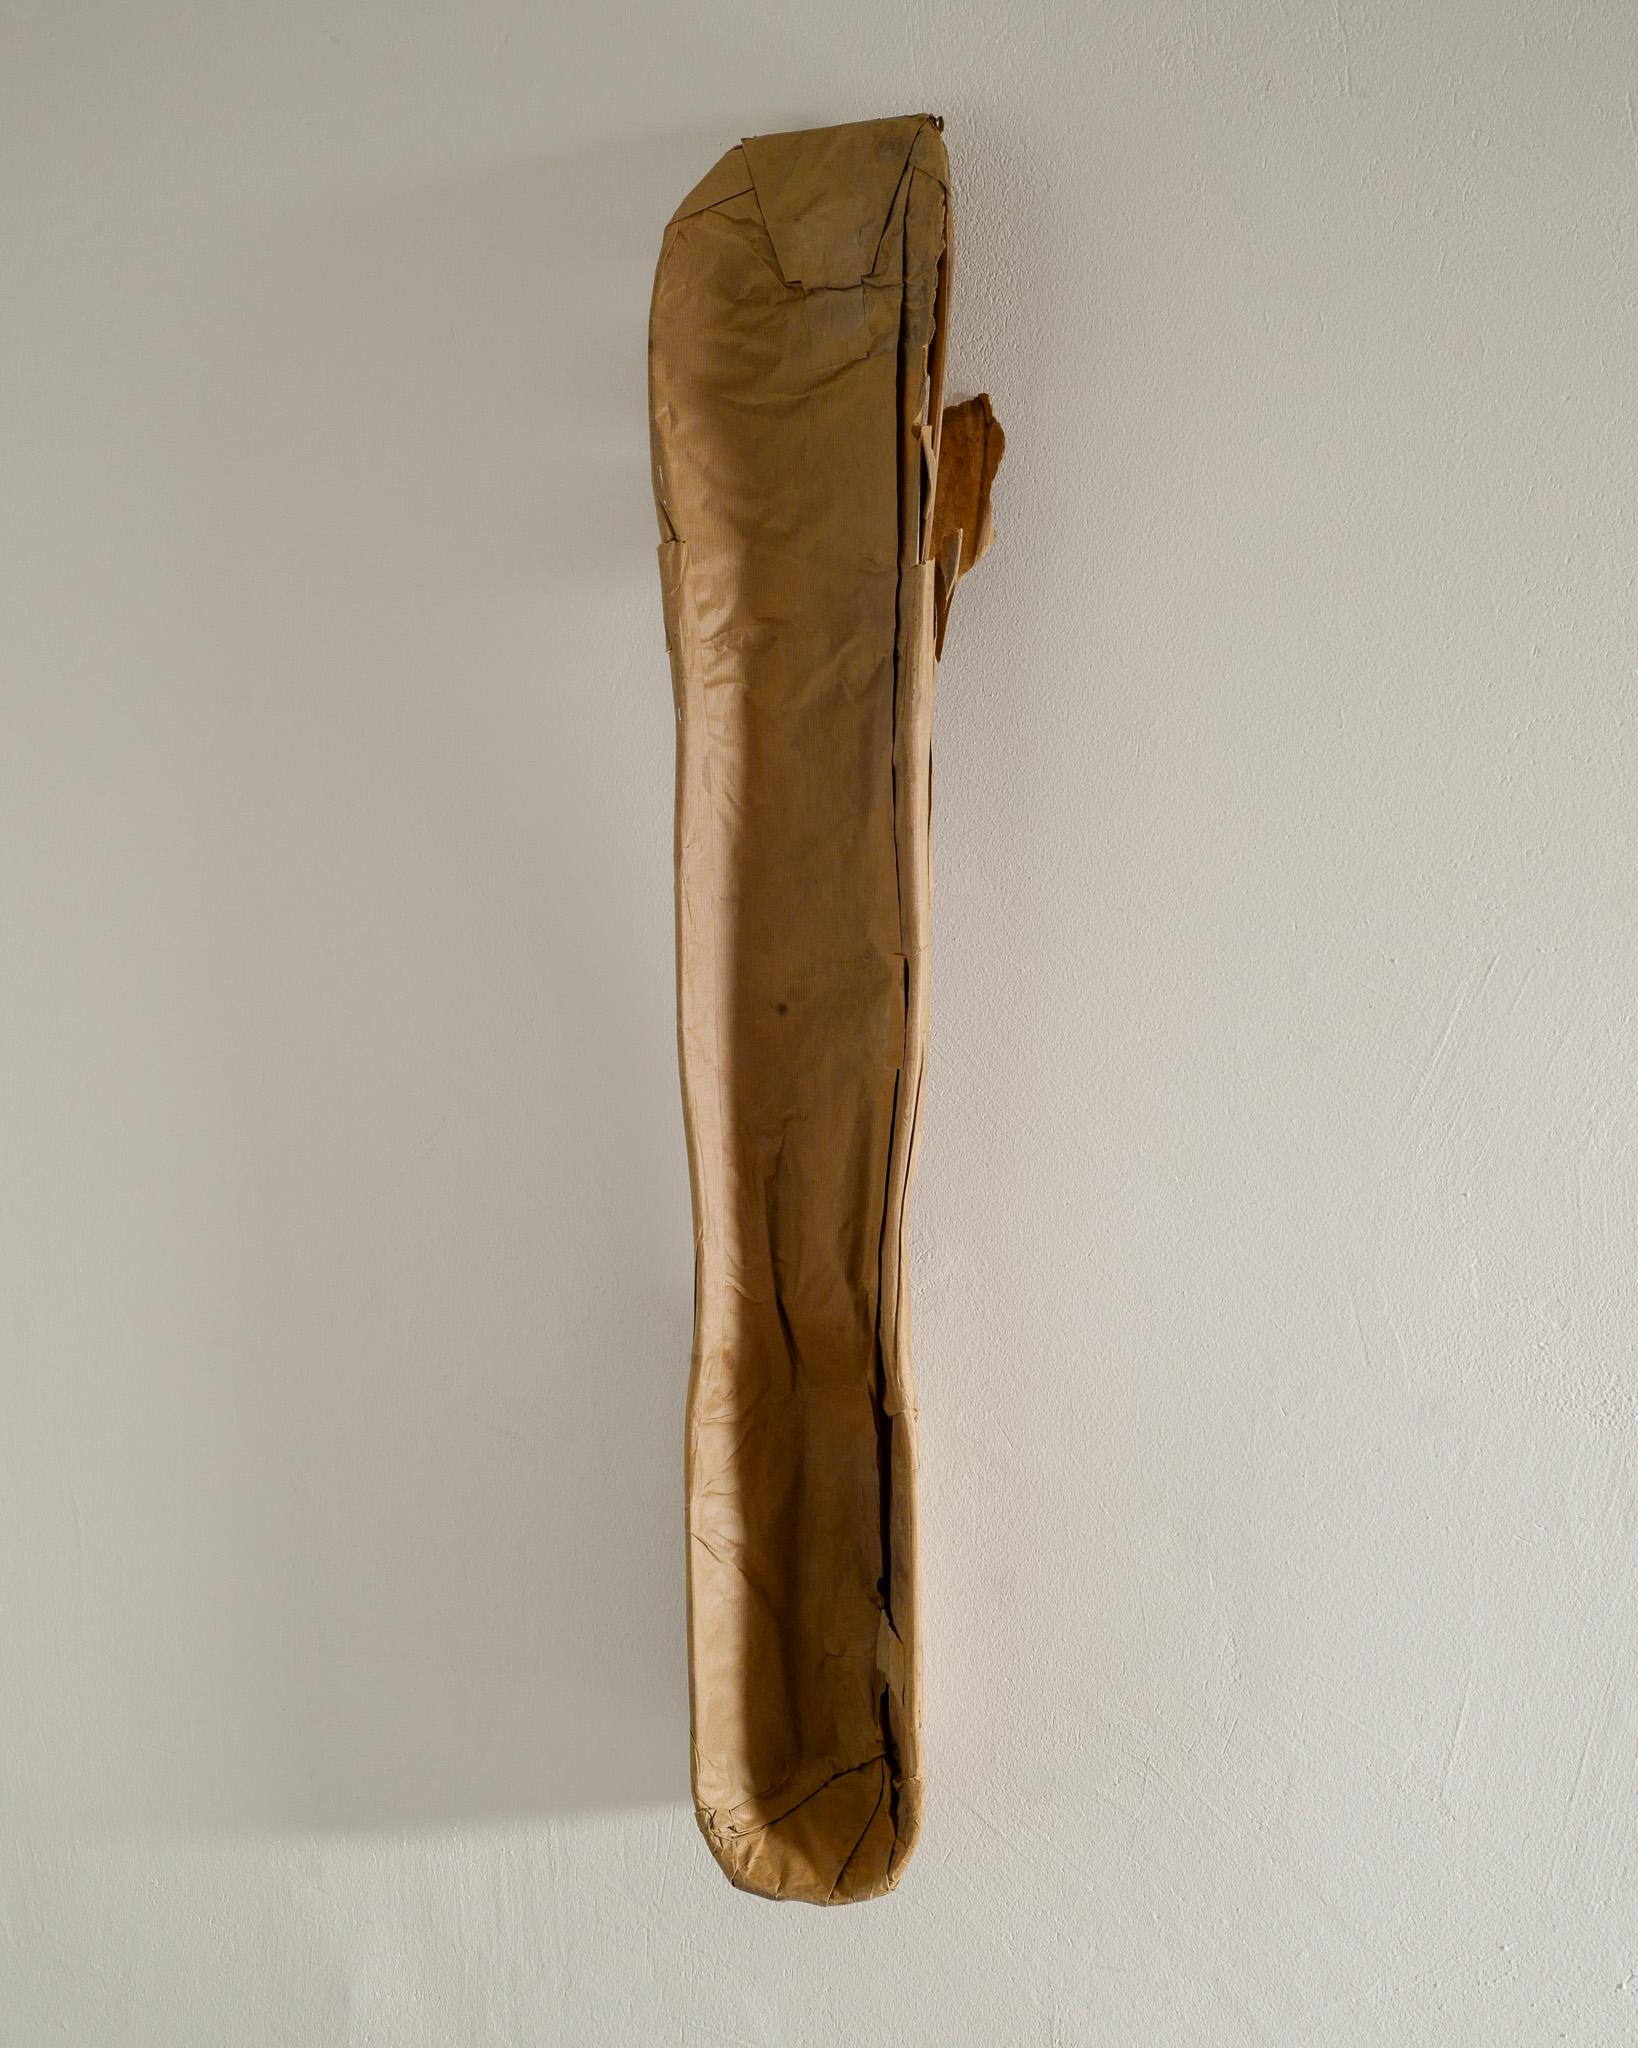 American Original Charles & Ray Eames Mid Century Leg Splint in Molded Plywood, 1943 For Sale